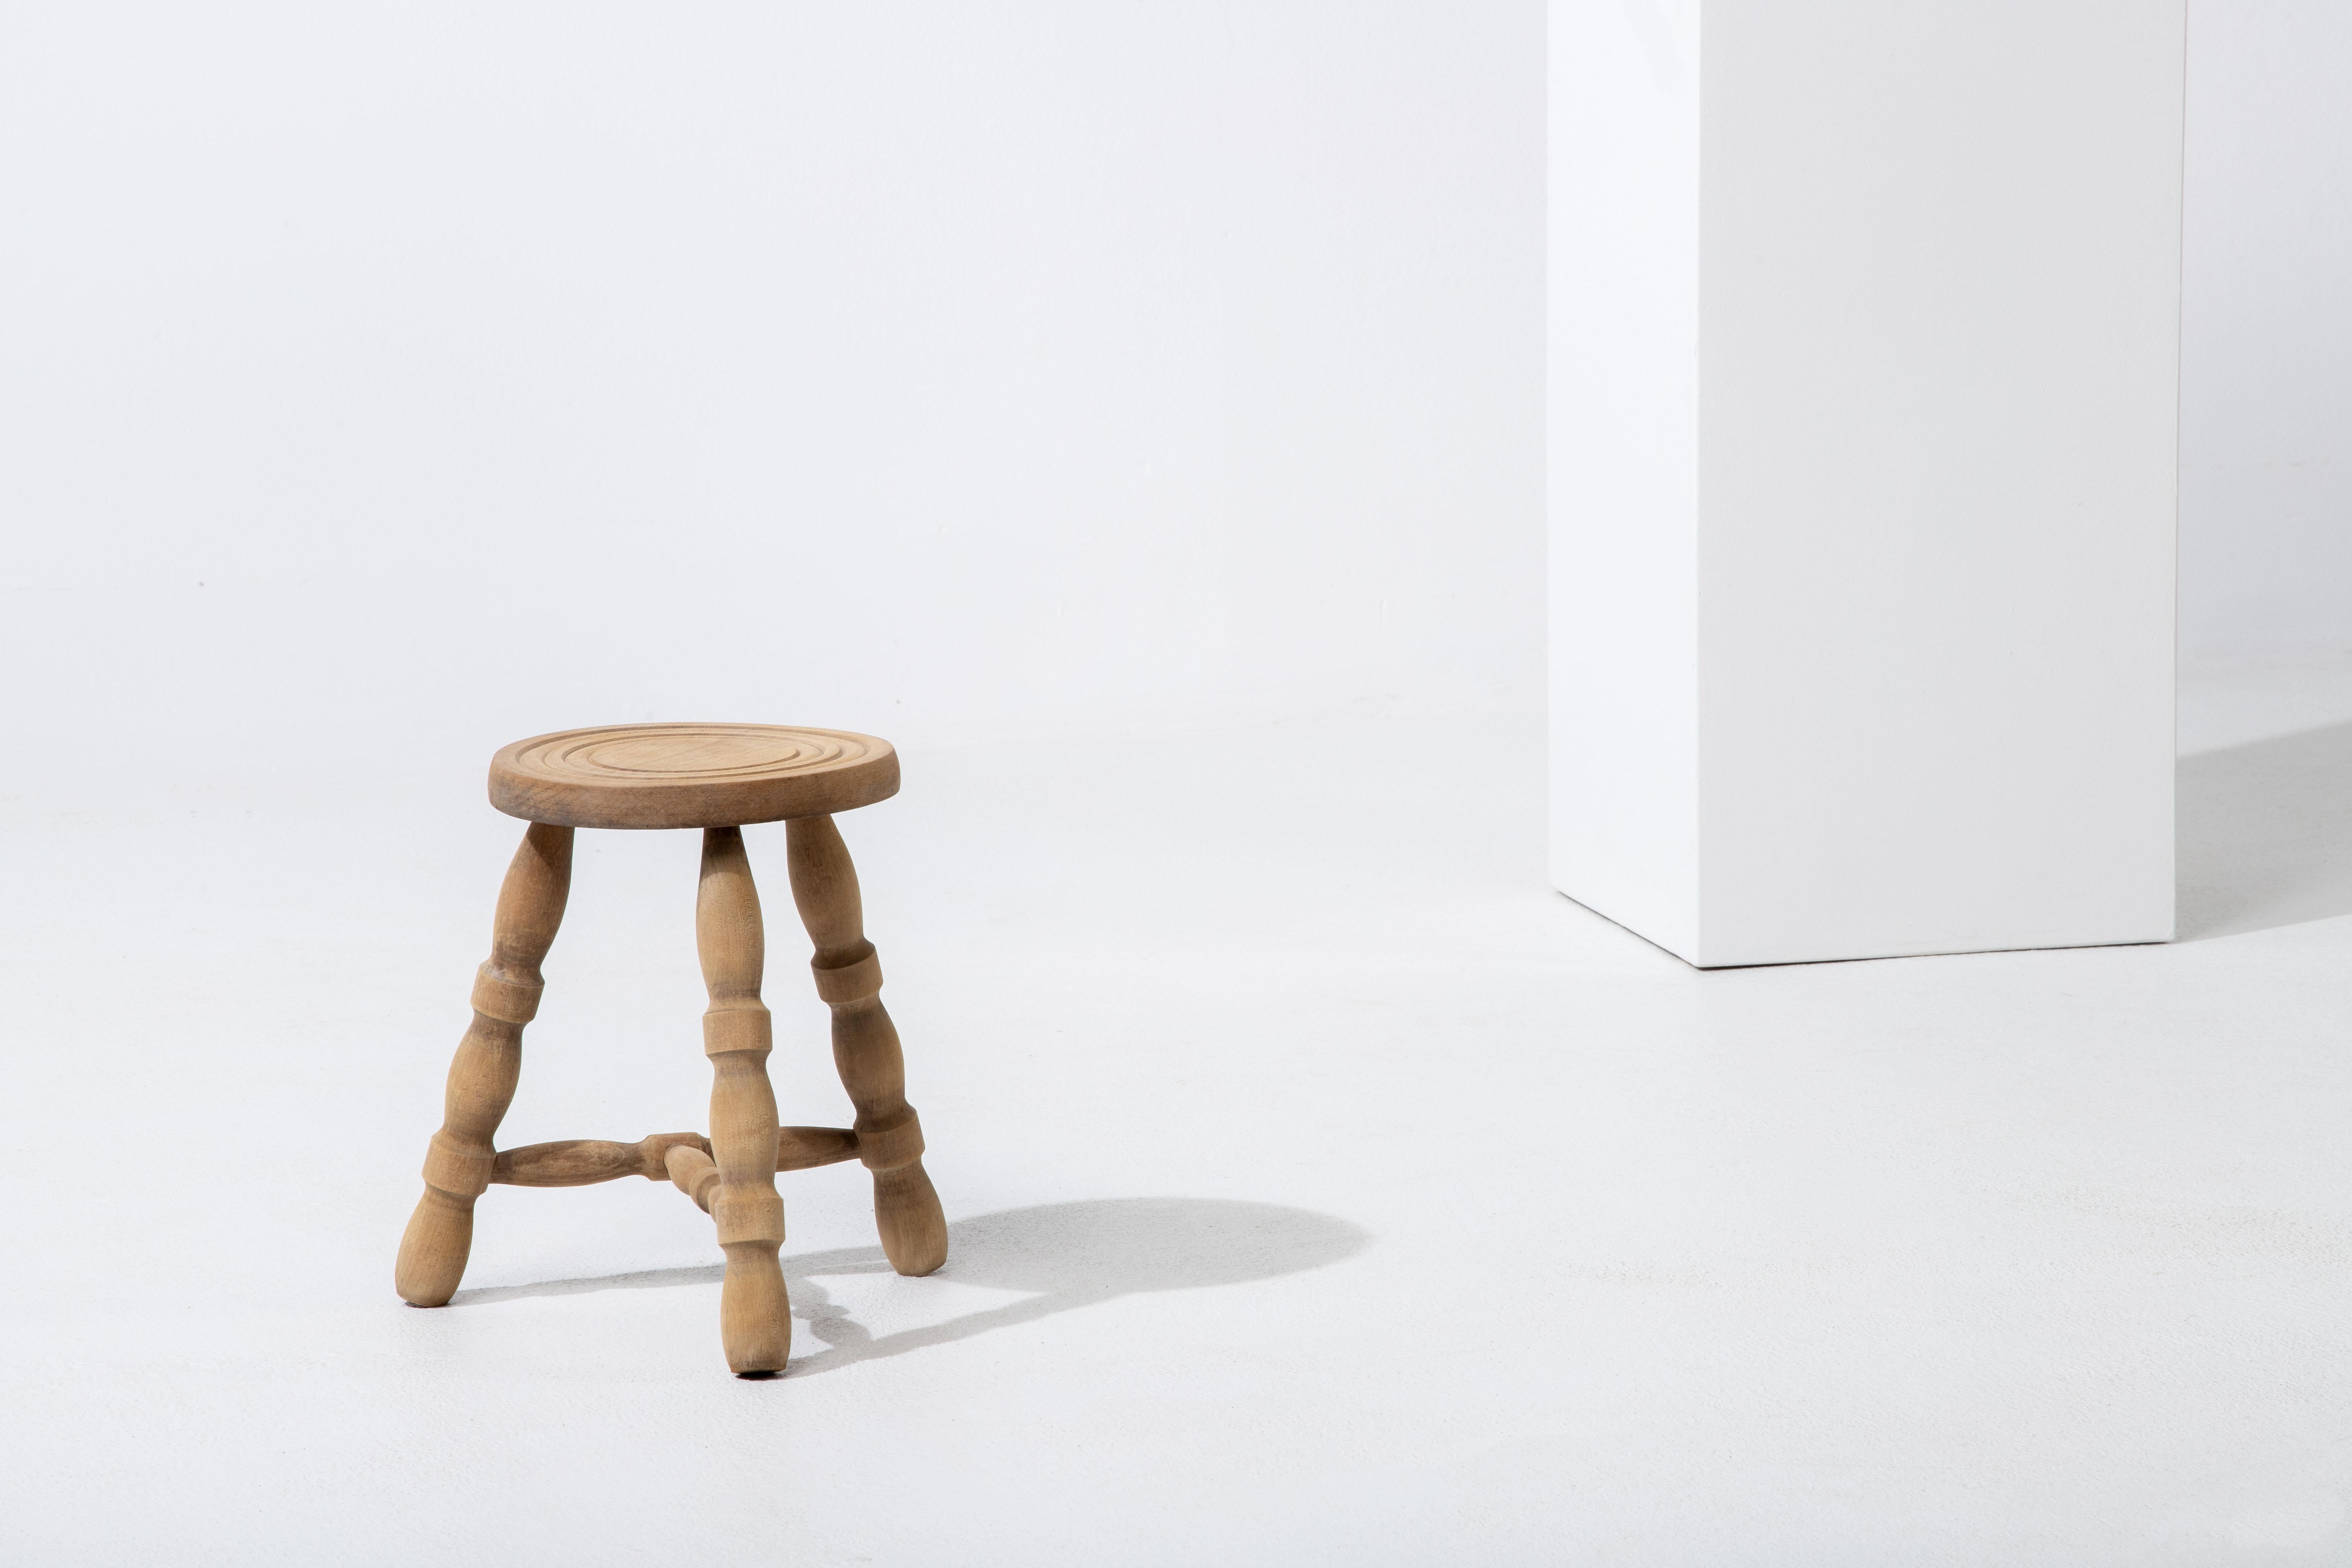 Exquisite Vintage French Wooden Stool: A Rustic Gem from the 1960s

Step into the rustic allure of 1960s France with this captivating wooden stool. Crafted in a truly rustic style, this piece emanates the charm of an era known for its unpretentious